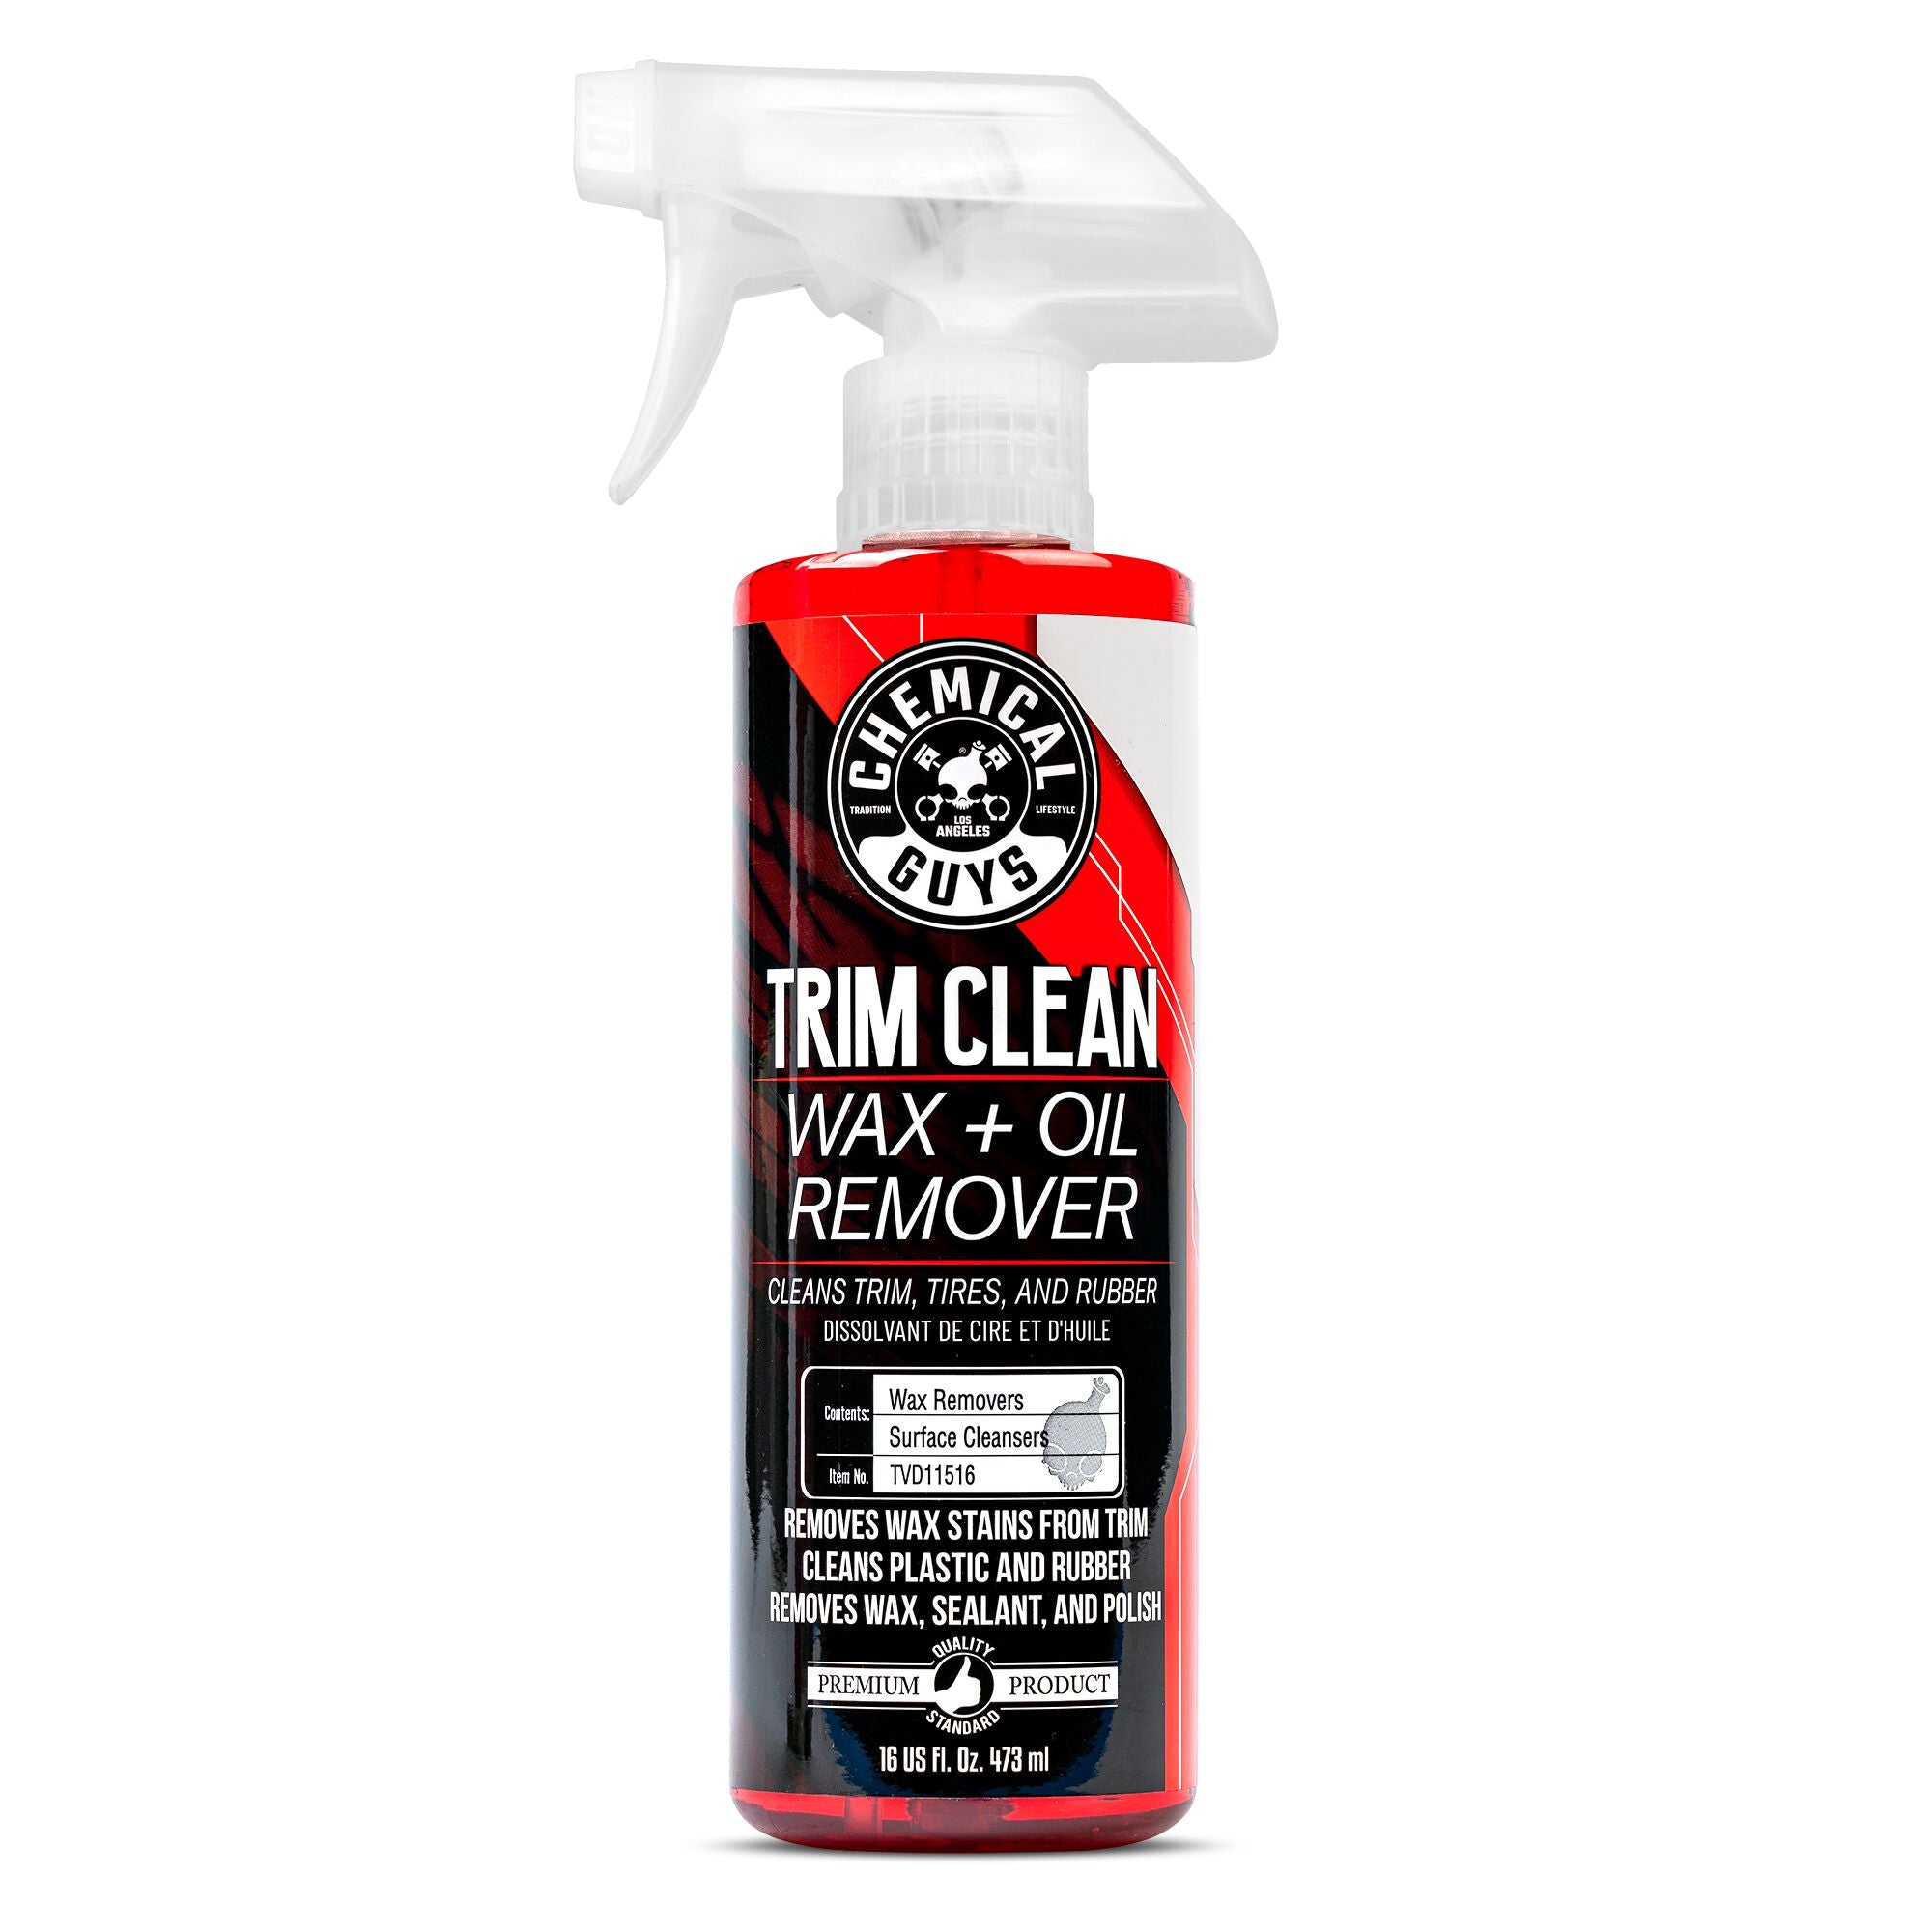 Trim Clean Wax and Oil Remover | Chemical Guys